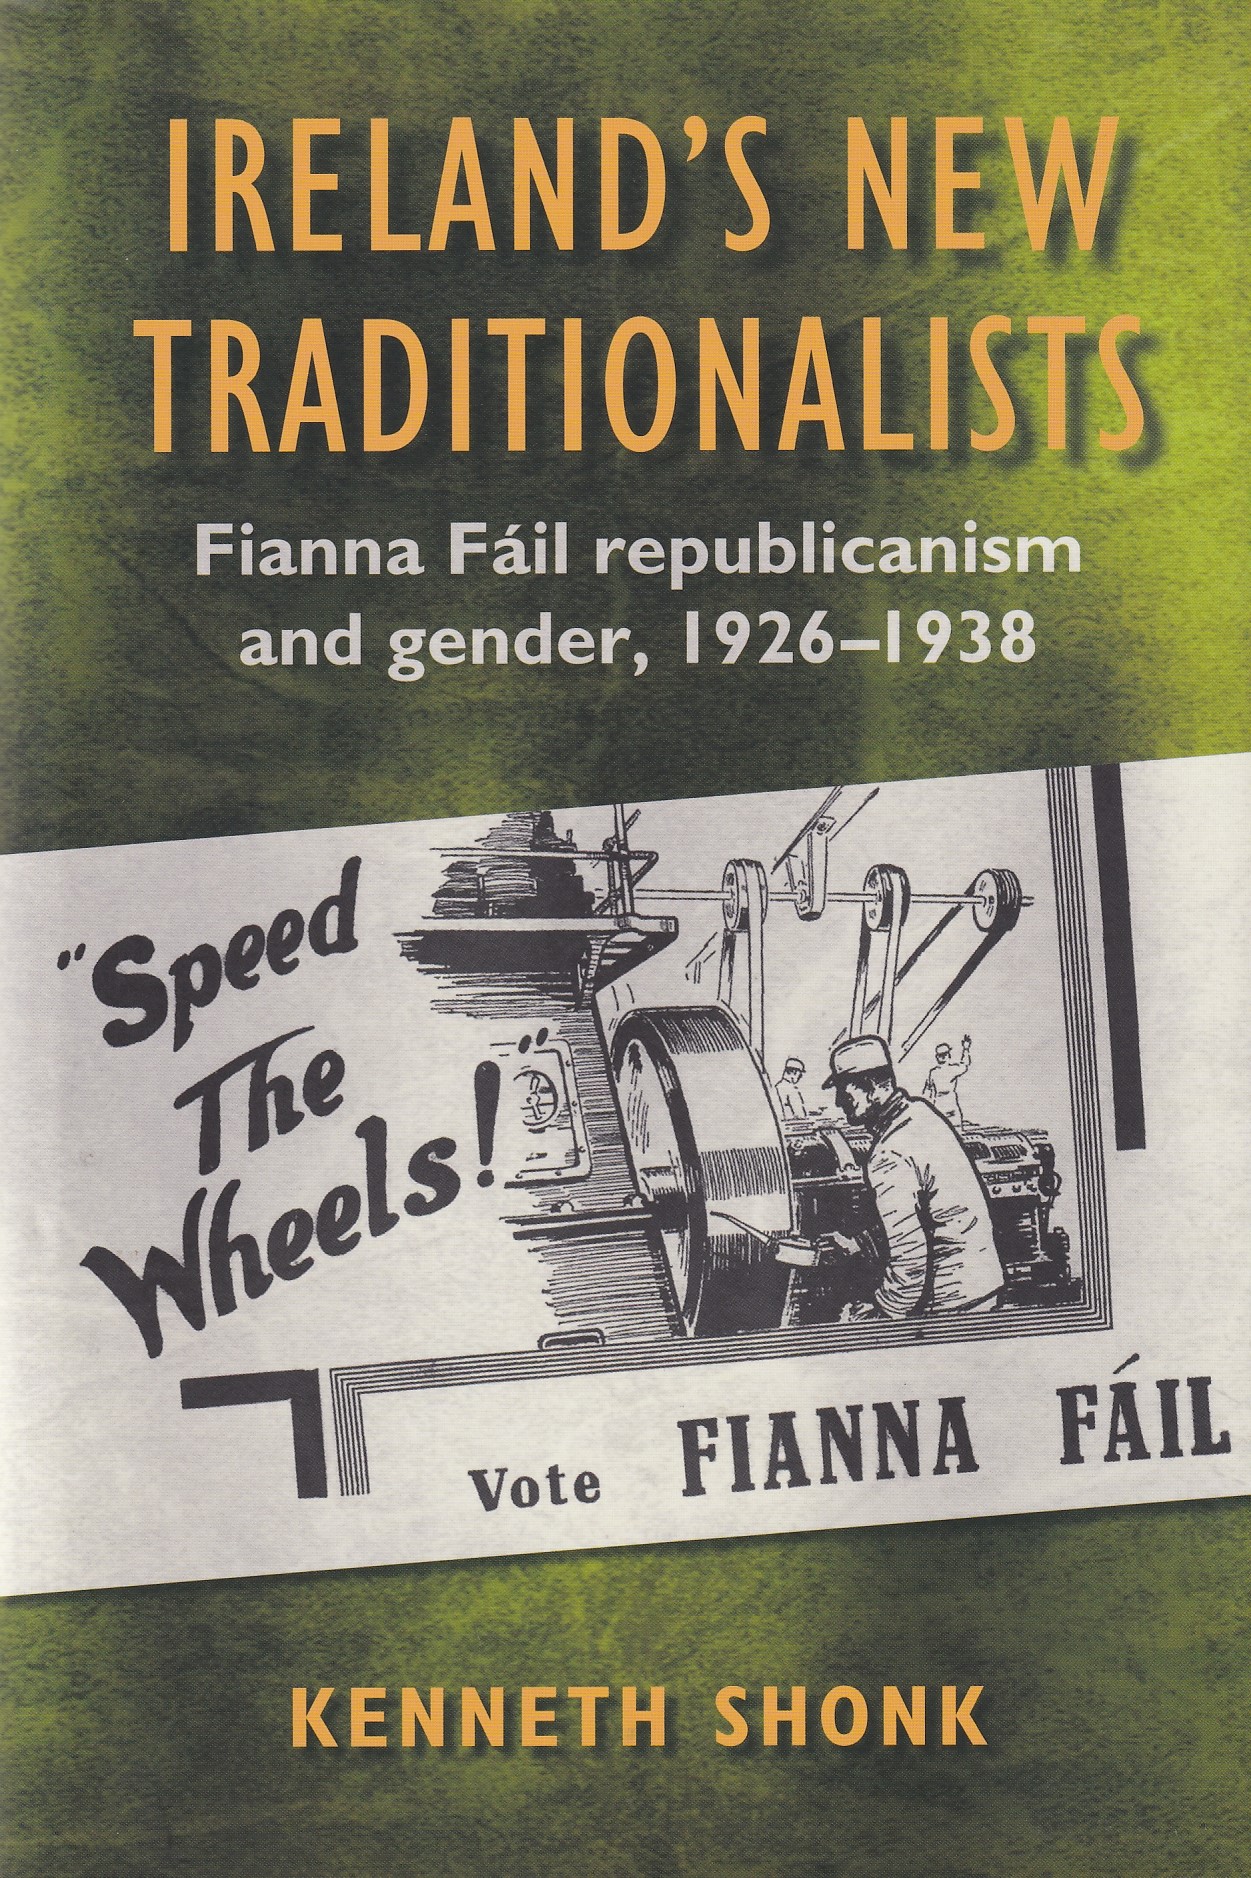 Ireland’s New Traditionalists: Fianna Fáil republicanism and gender, 1926-1938 | Kenneth Shonk | Charlie Byrne's